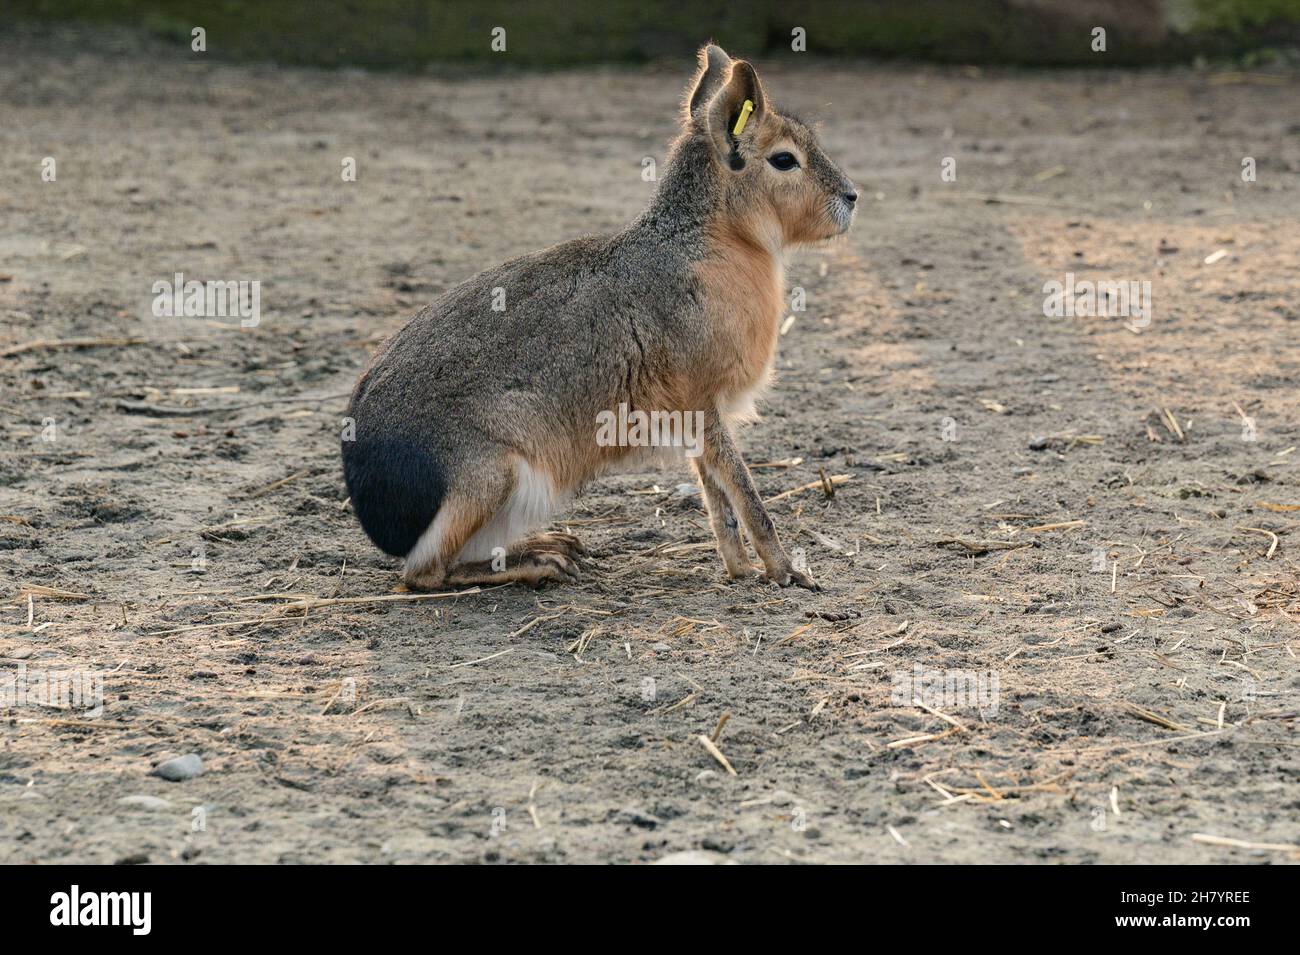 Dolichotis patagonum at the zoo, a rodent, Patagonian hare or Patagonian kavi. Stock Photo